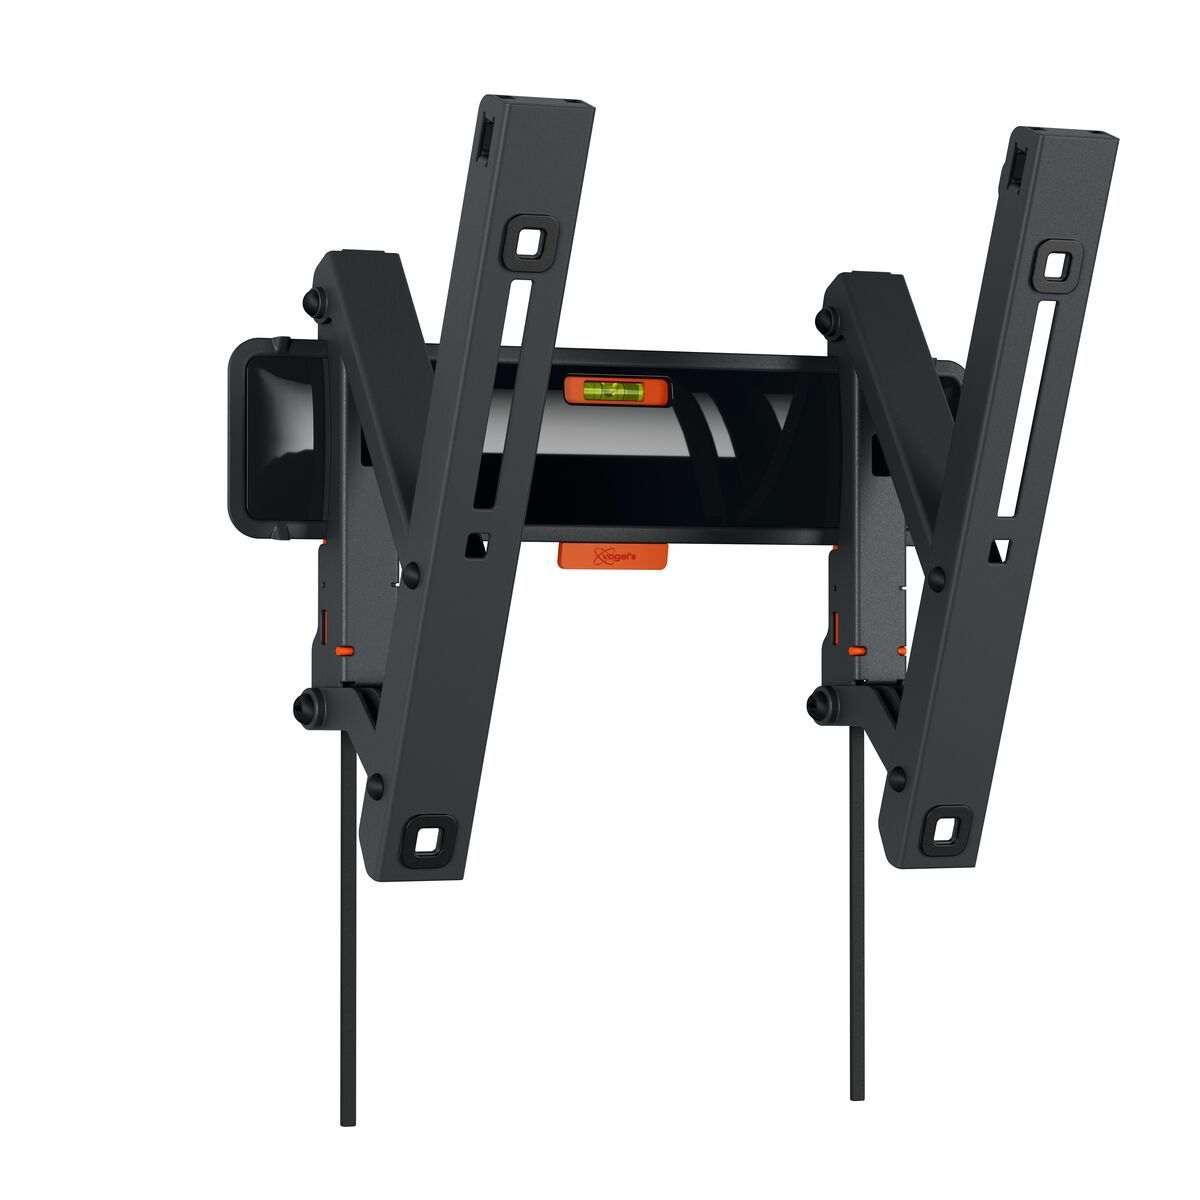 Vogel's TVM 3215 Tilting TV Wall Mount - Suitable for 19 up to 43 inch TVs - Tilt up to 20° - Product